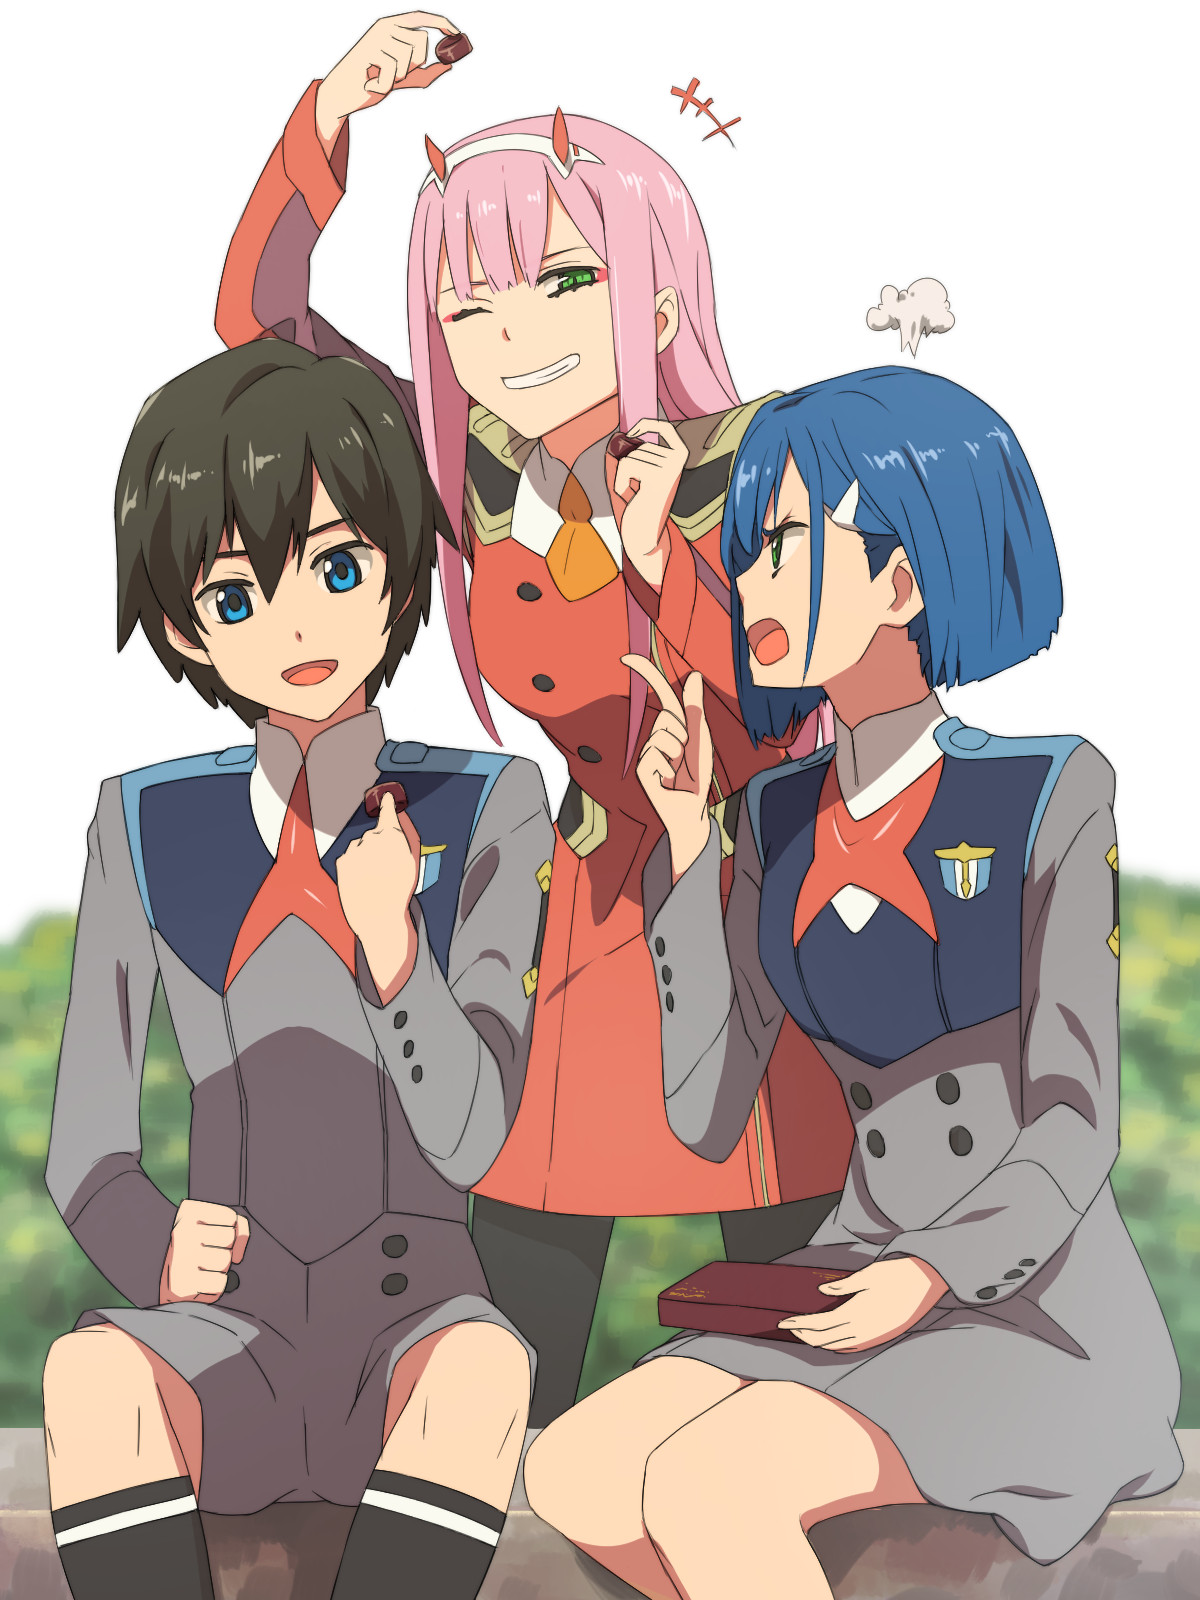 Darling in the franxx꧂༒ (@VictorD42604851) / X